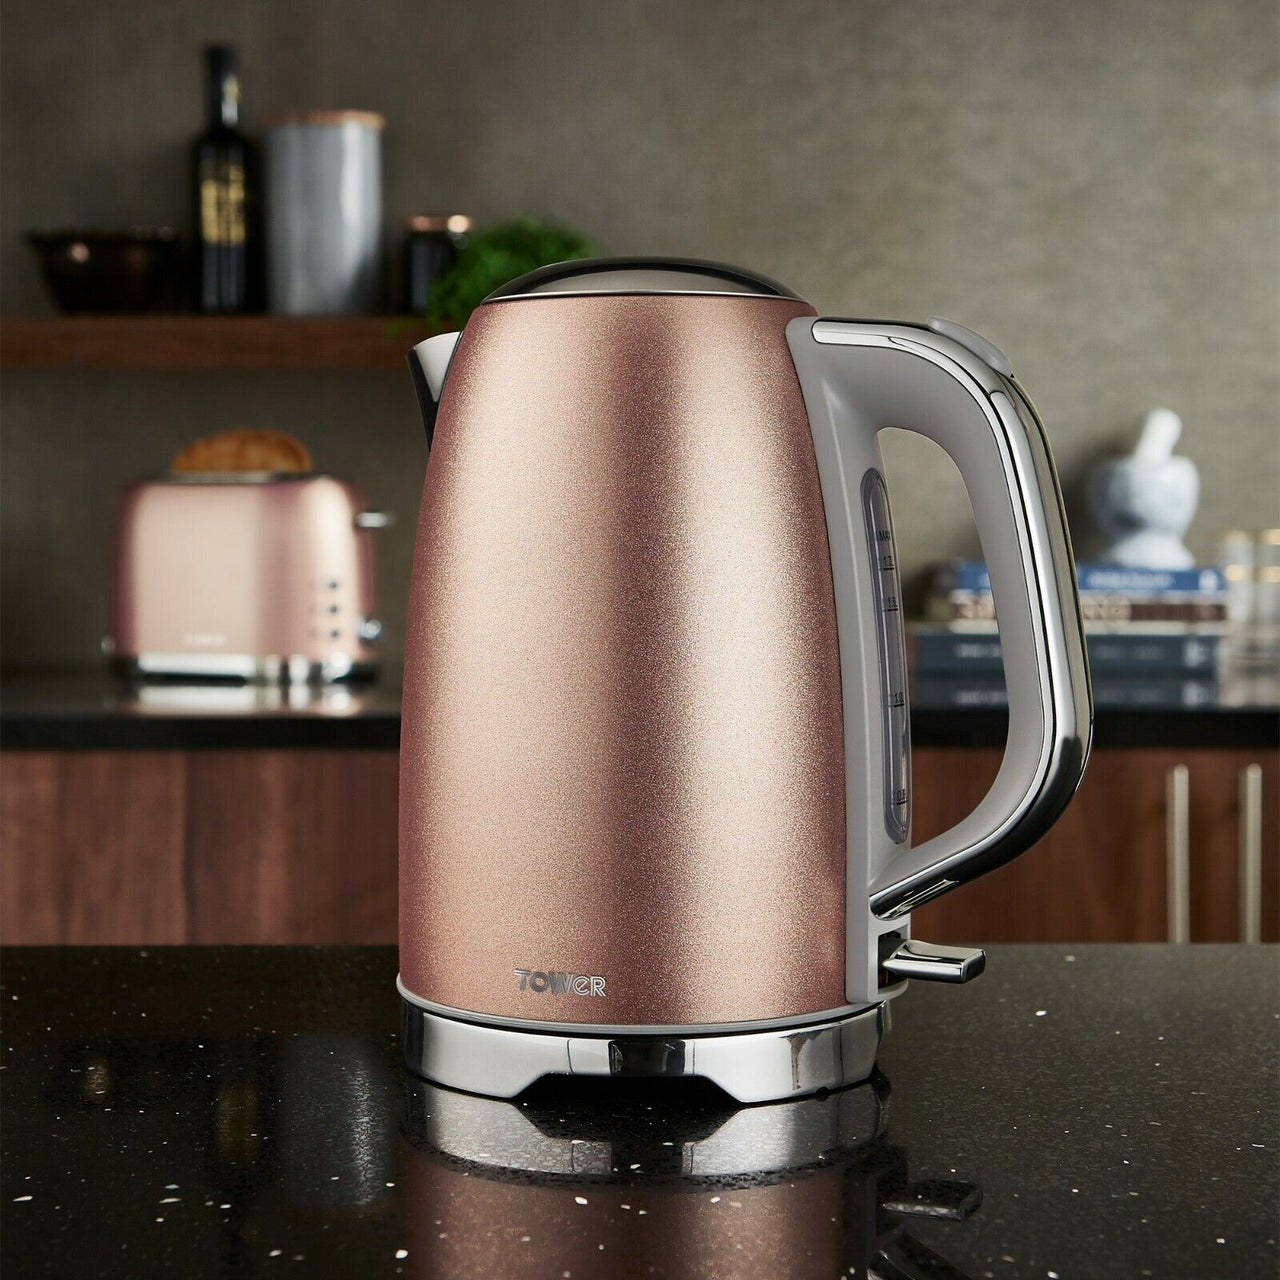 Tower Glitz 1.7L 3KW Kettle & 2 Slice Toaster Set in Blush Pink with Chromed Base